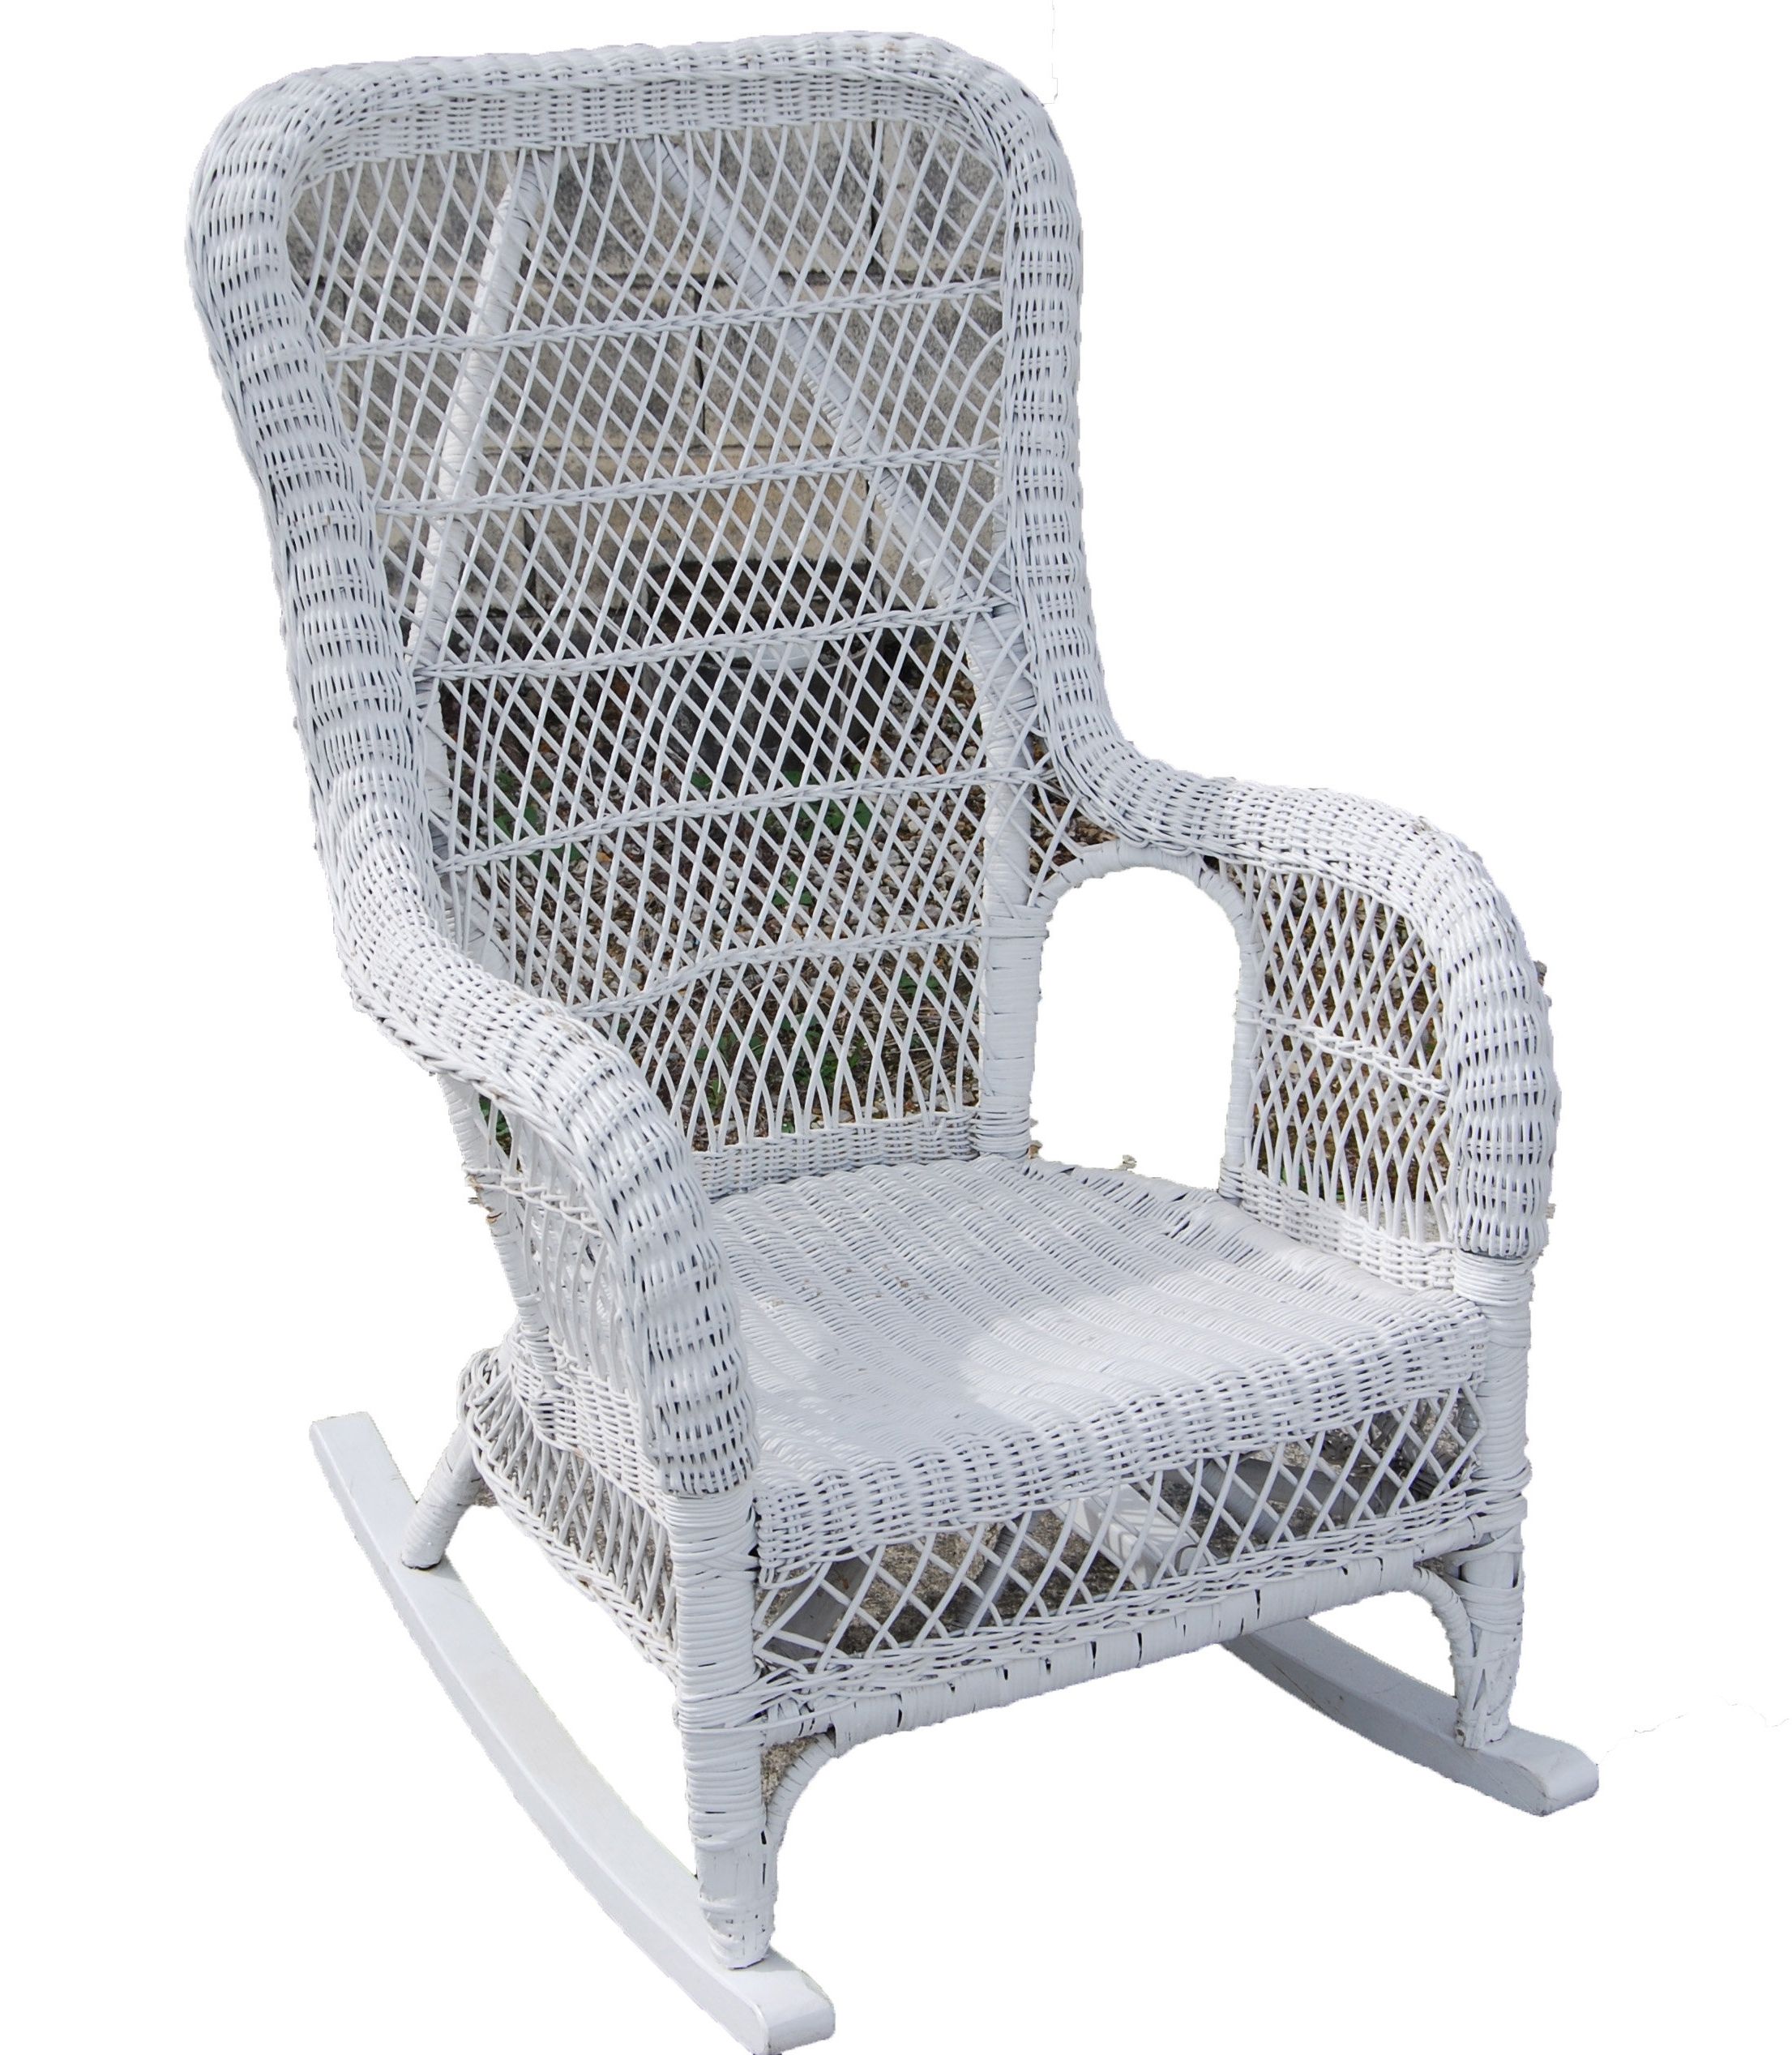 Most Recent Wicker Rocking Chair With Magazine Holder Intended For Wicker Rocking Chairs For Porch Arm Chair Wicker & Loom Round Back (View 9 of 15)